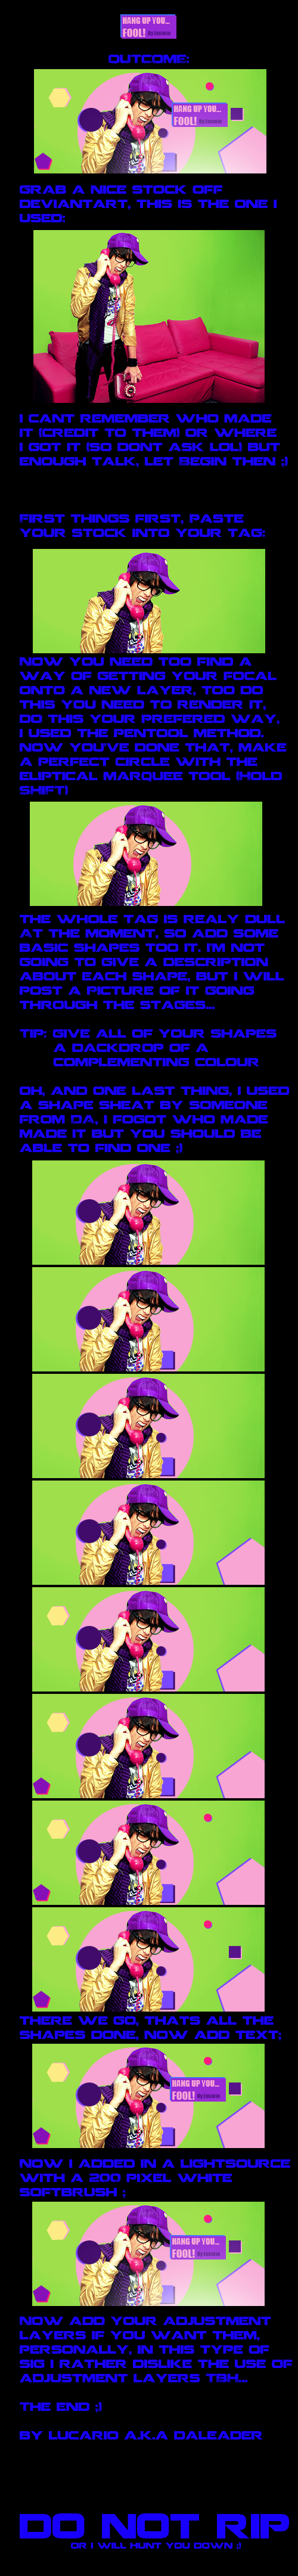 hang_up_you_fool___tutorial_by_daleader-d479cto.png